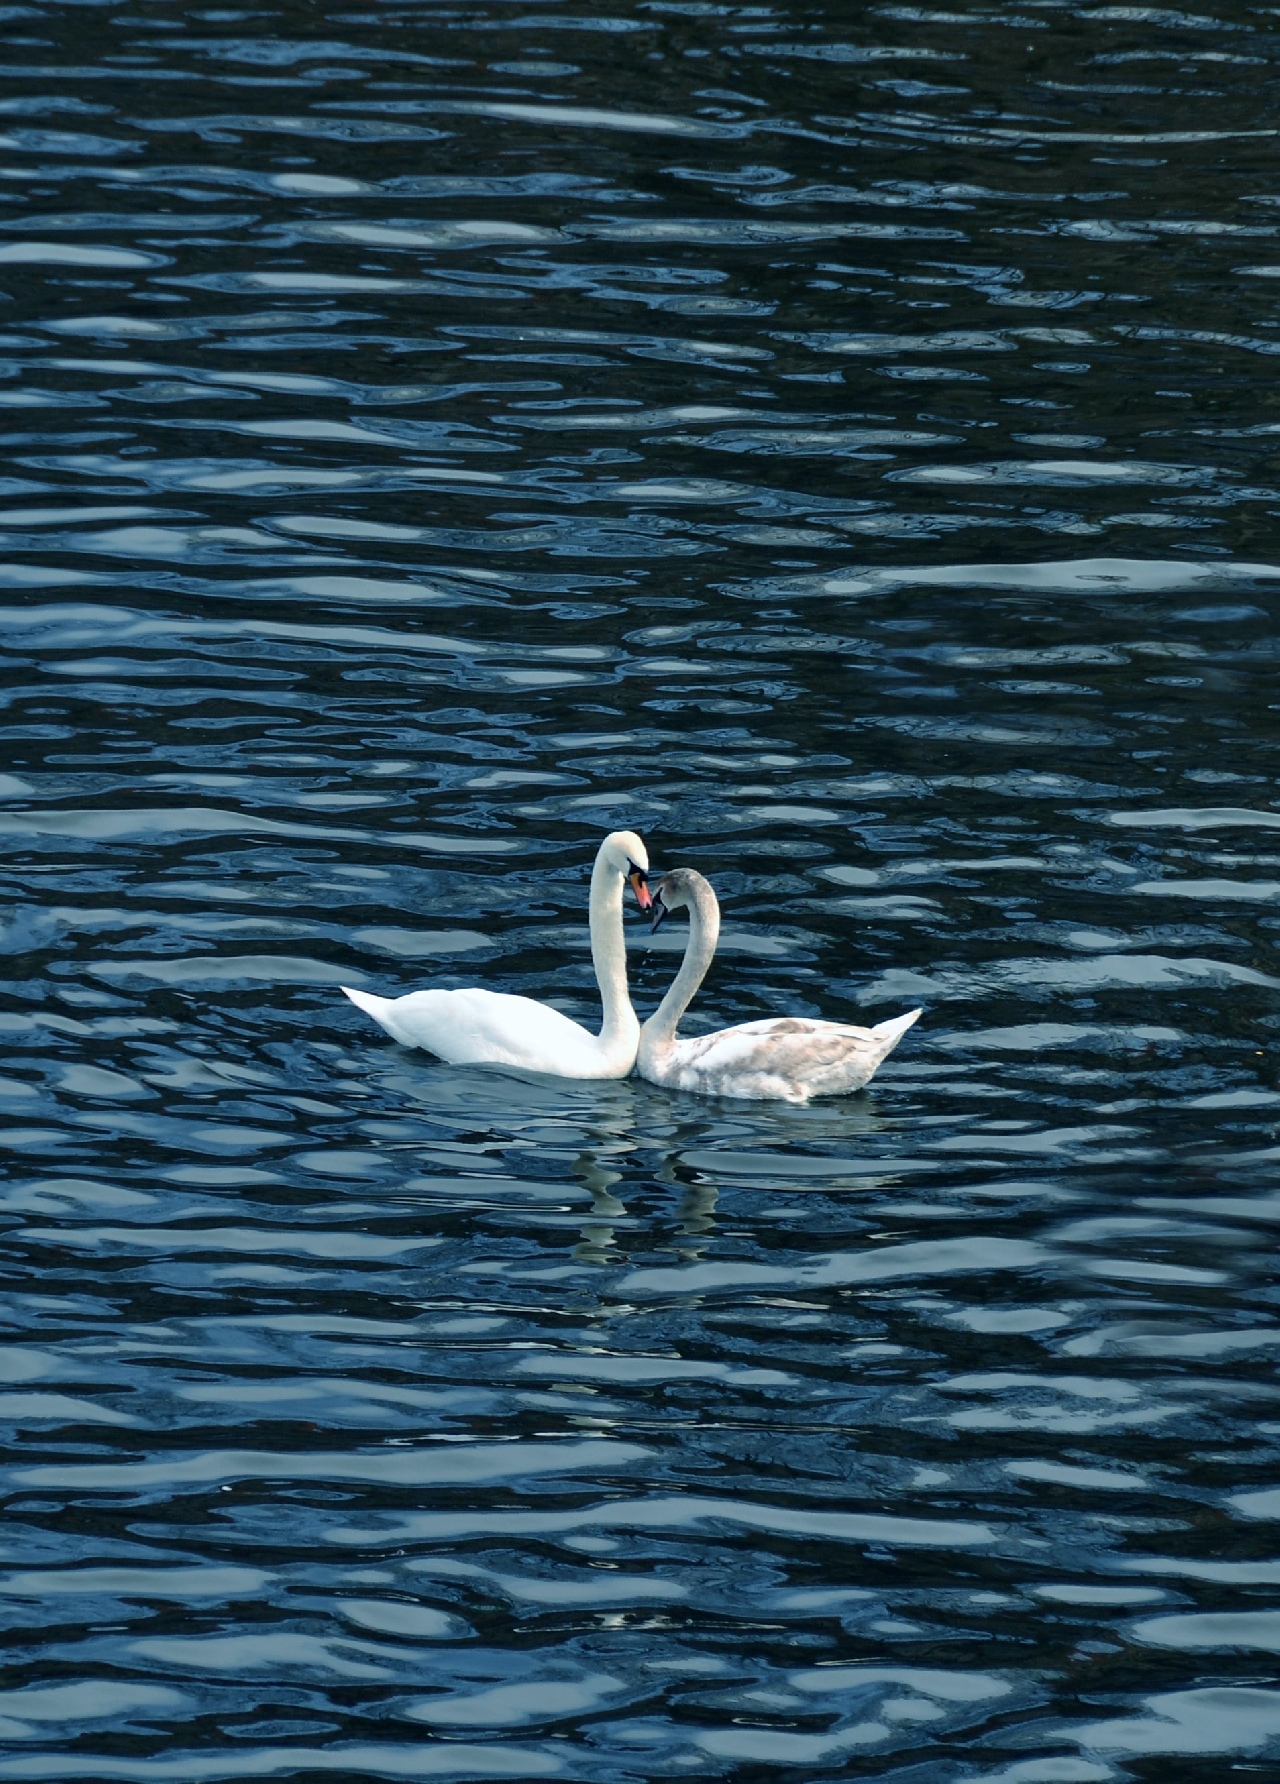 2 swans in a lake and thier necks are coming together like a heart